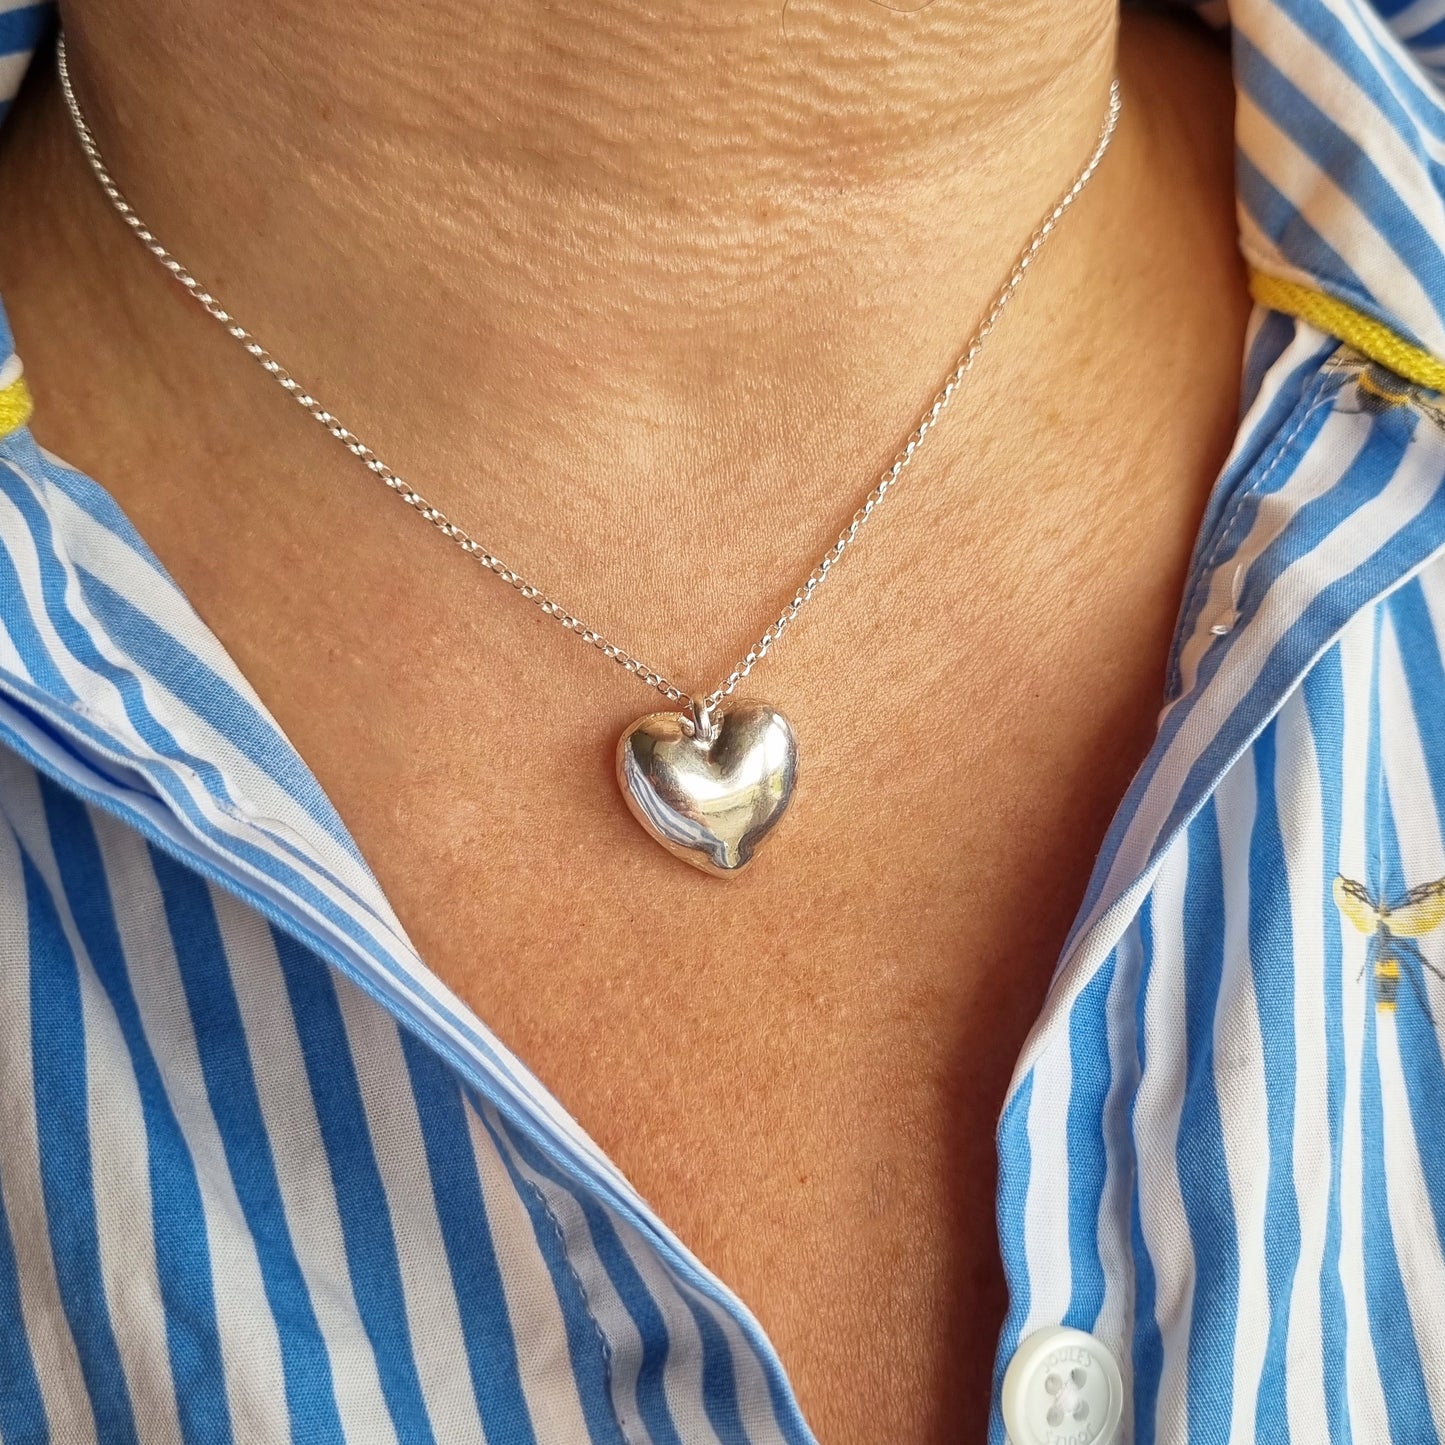 Heartstopper! - Huge puffy gold or silver heart necklace, and it's hollow!